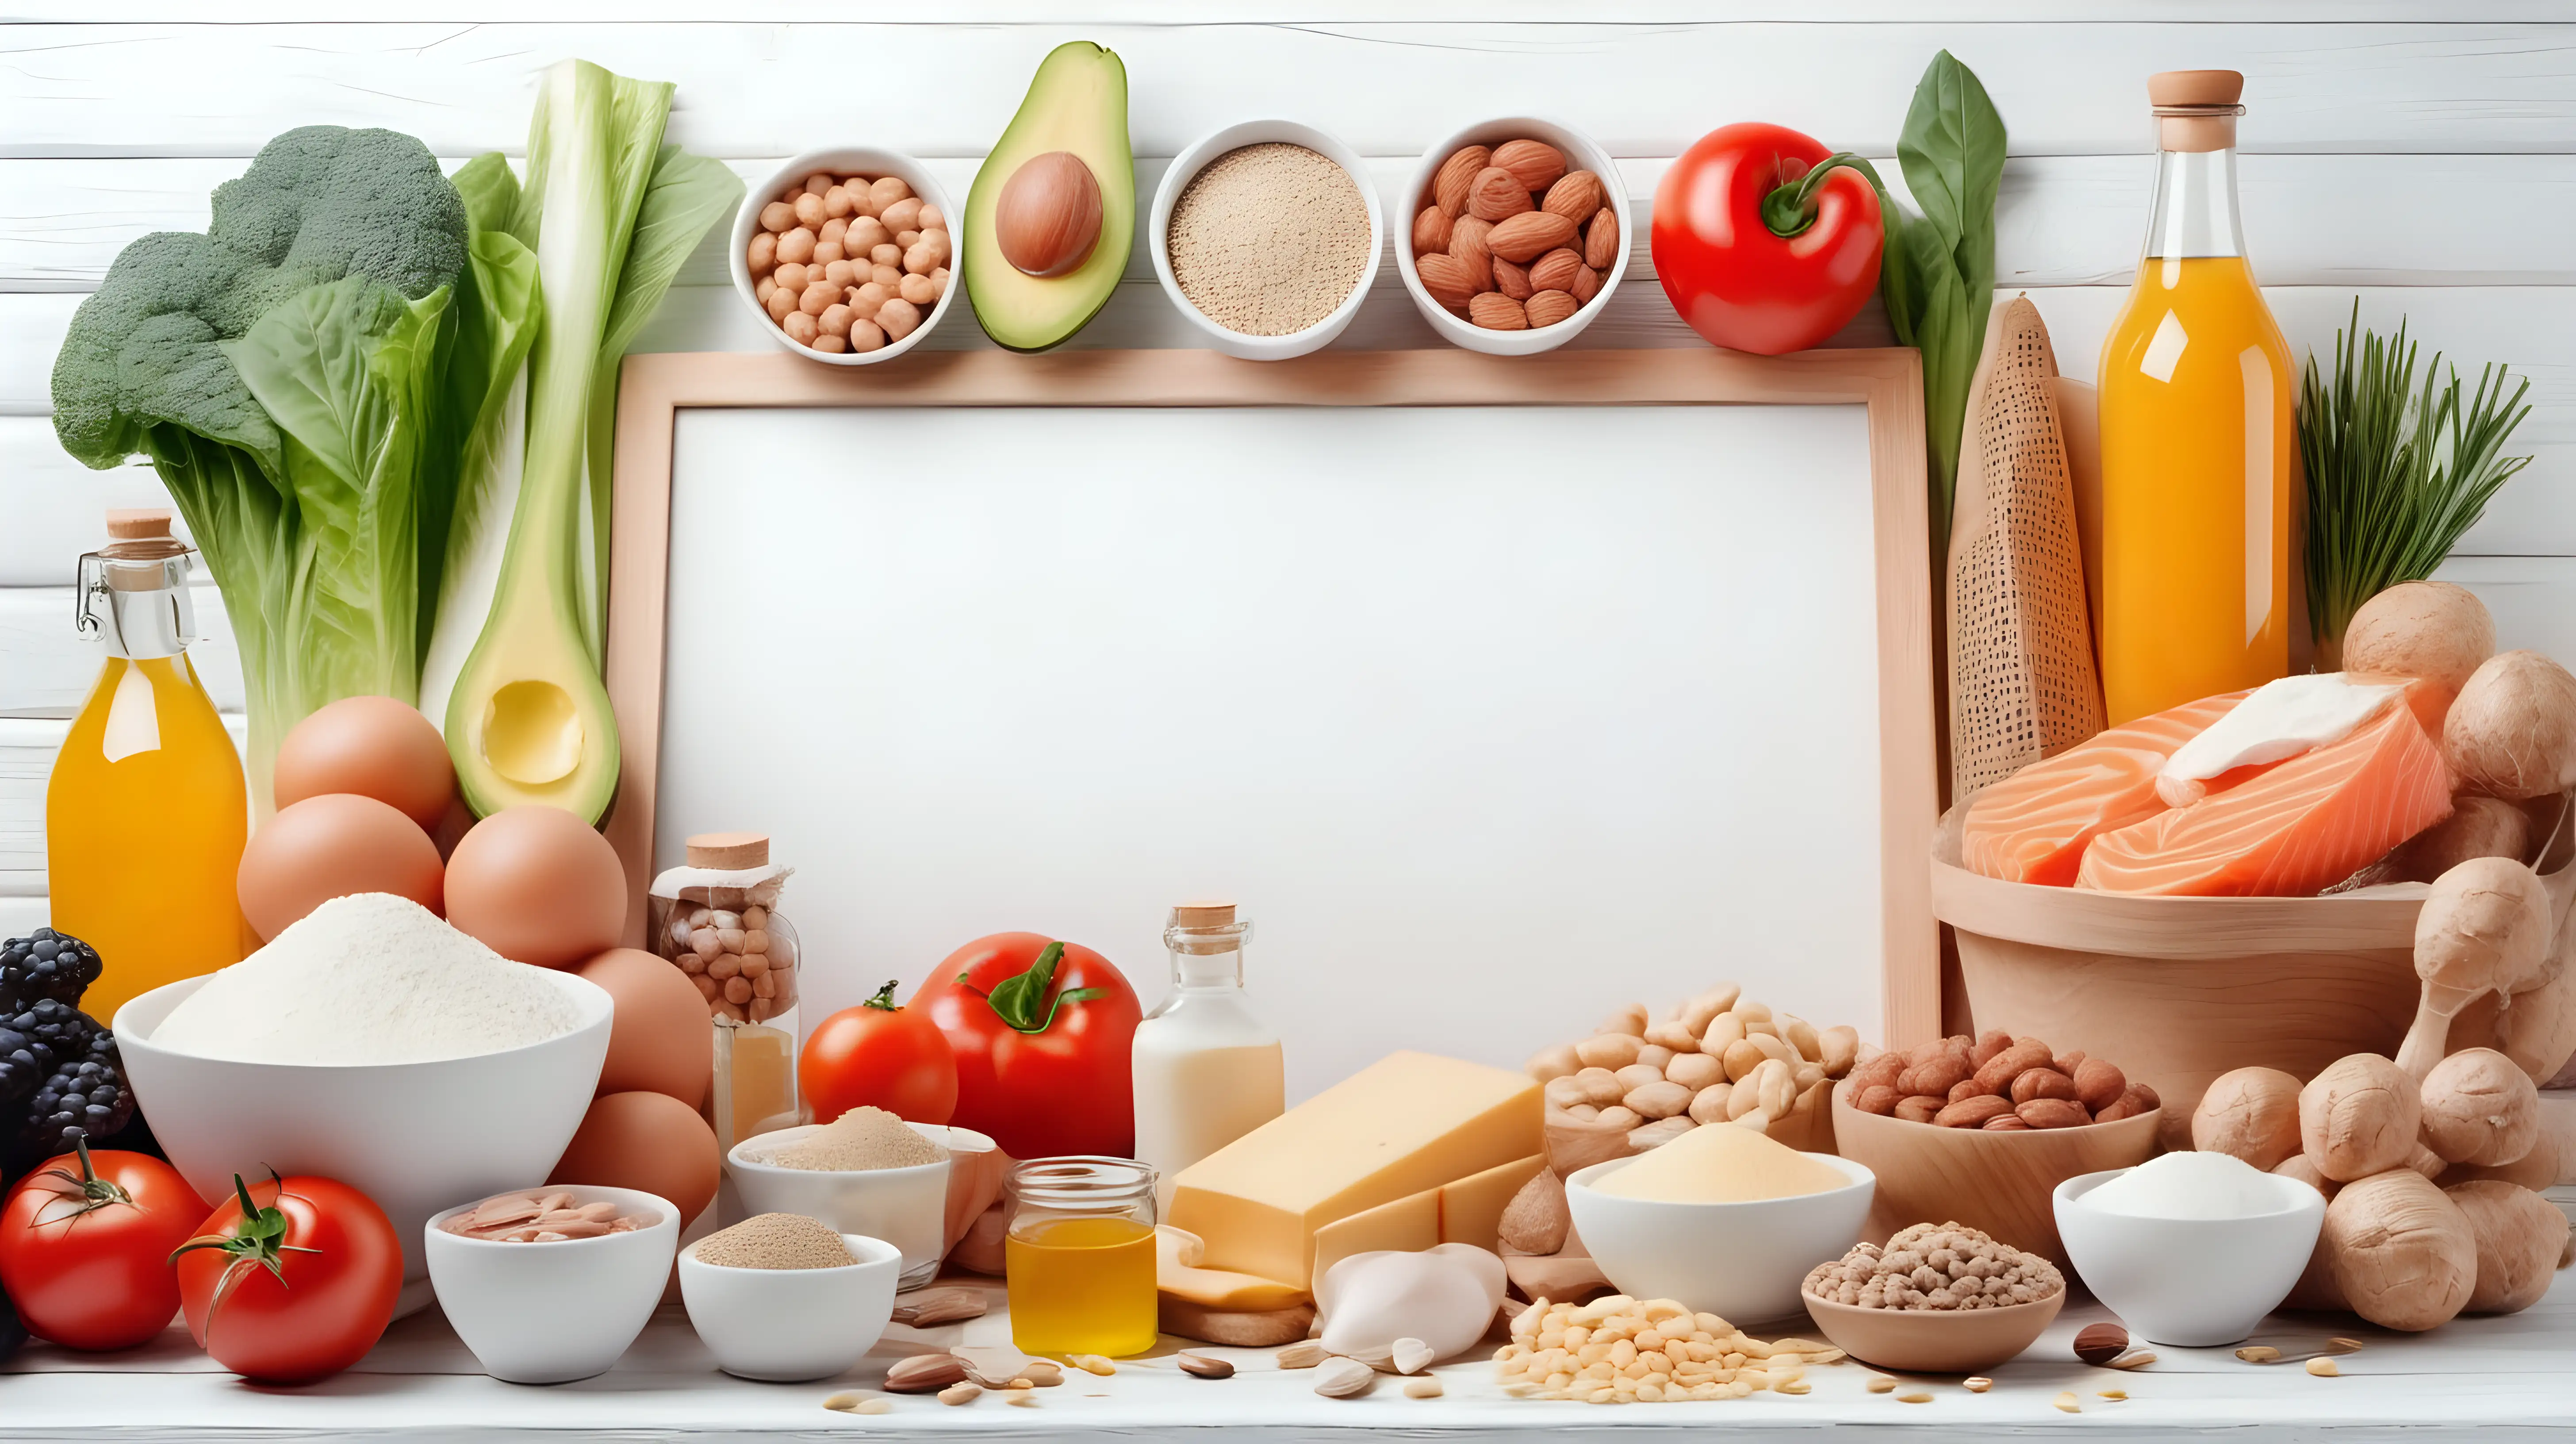 Healthy Diet Ingredients Arranged on Wooden Table with Copy Space